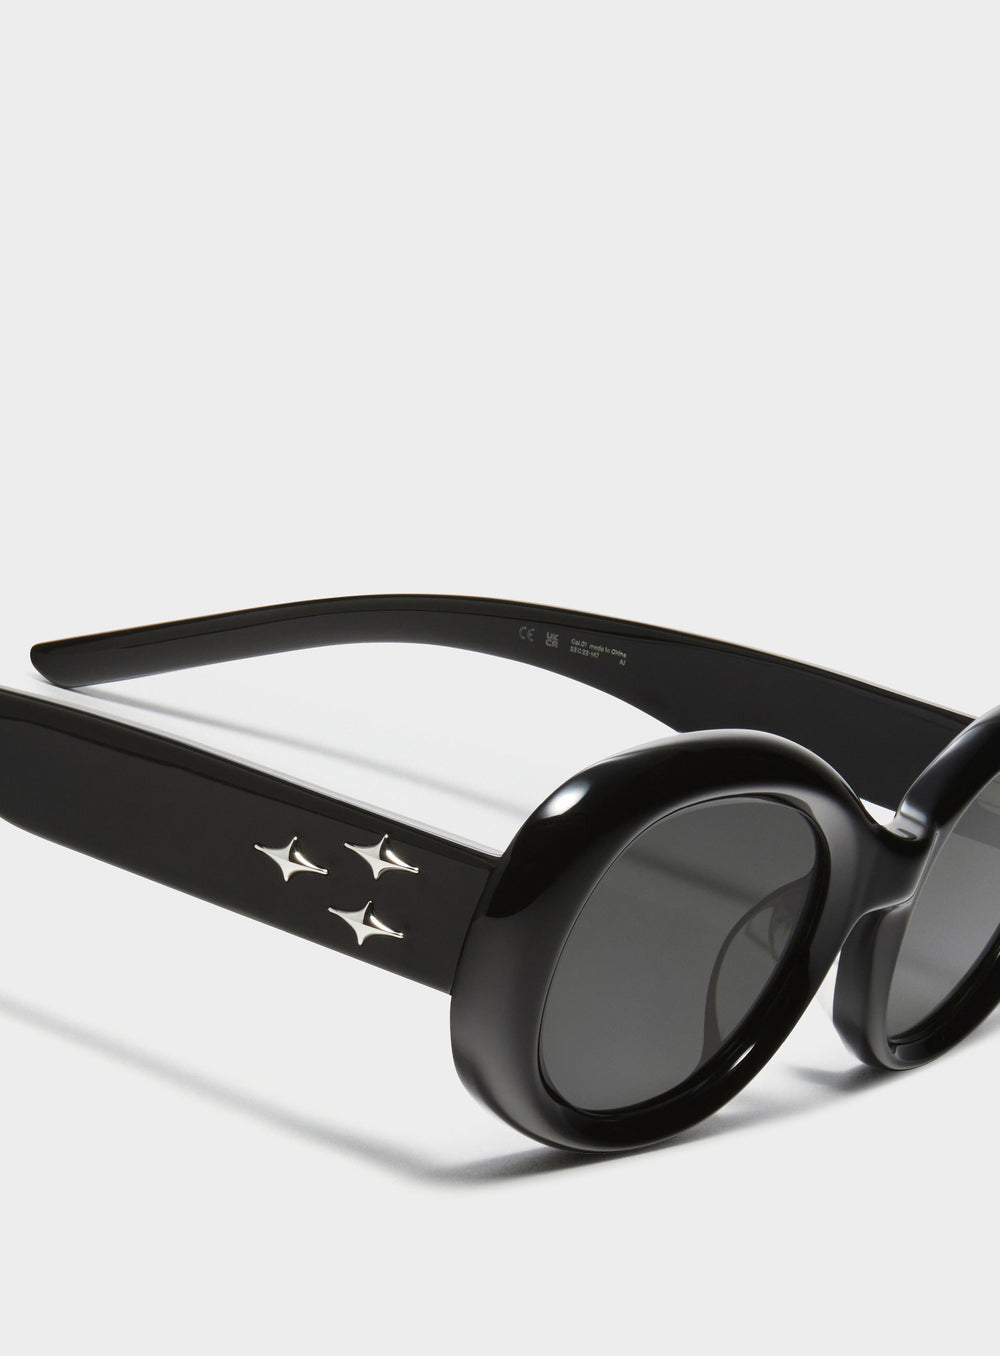 Close-up of Triangulum in black round Sunglasses lenses, high-quality eyewear by Mercury Retrograde Galaxy Collection 